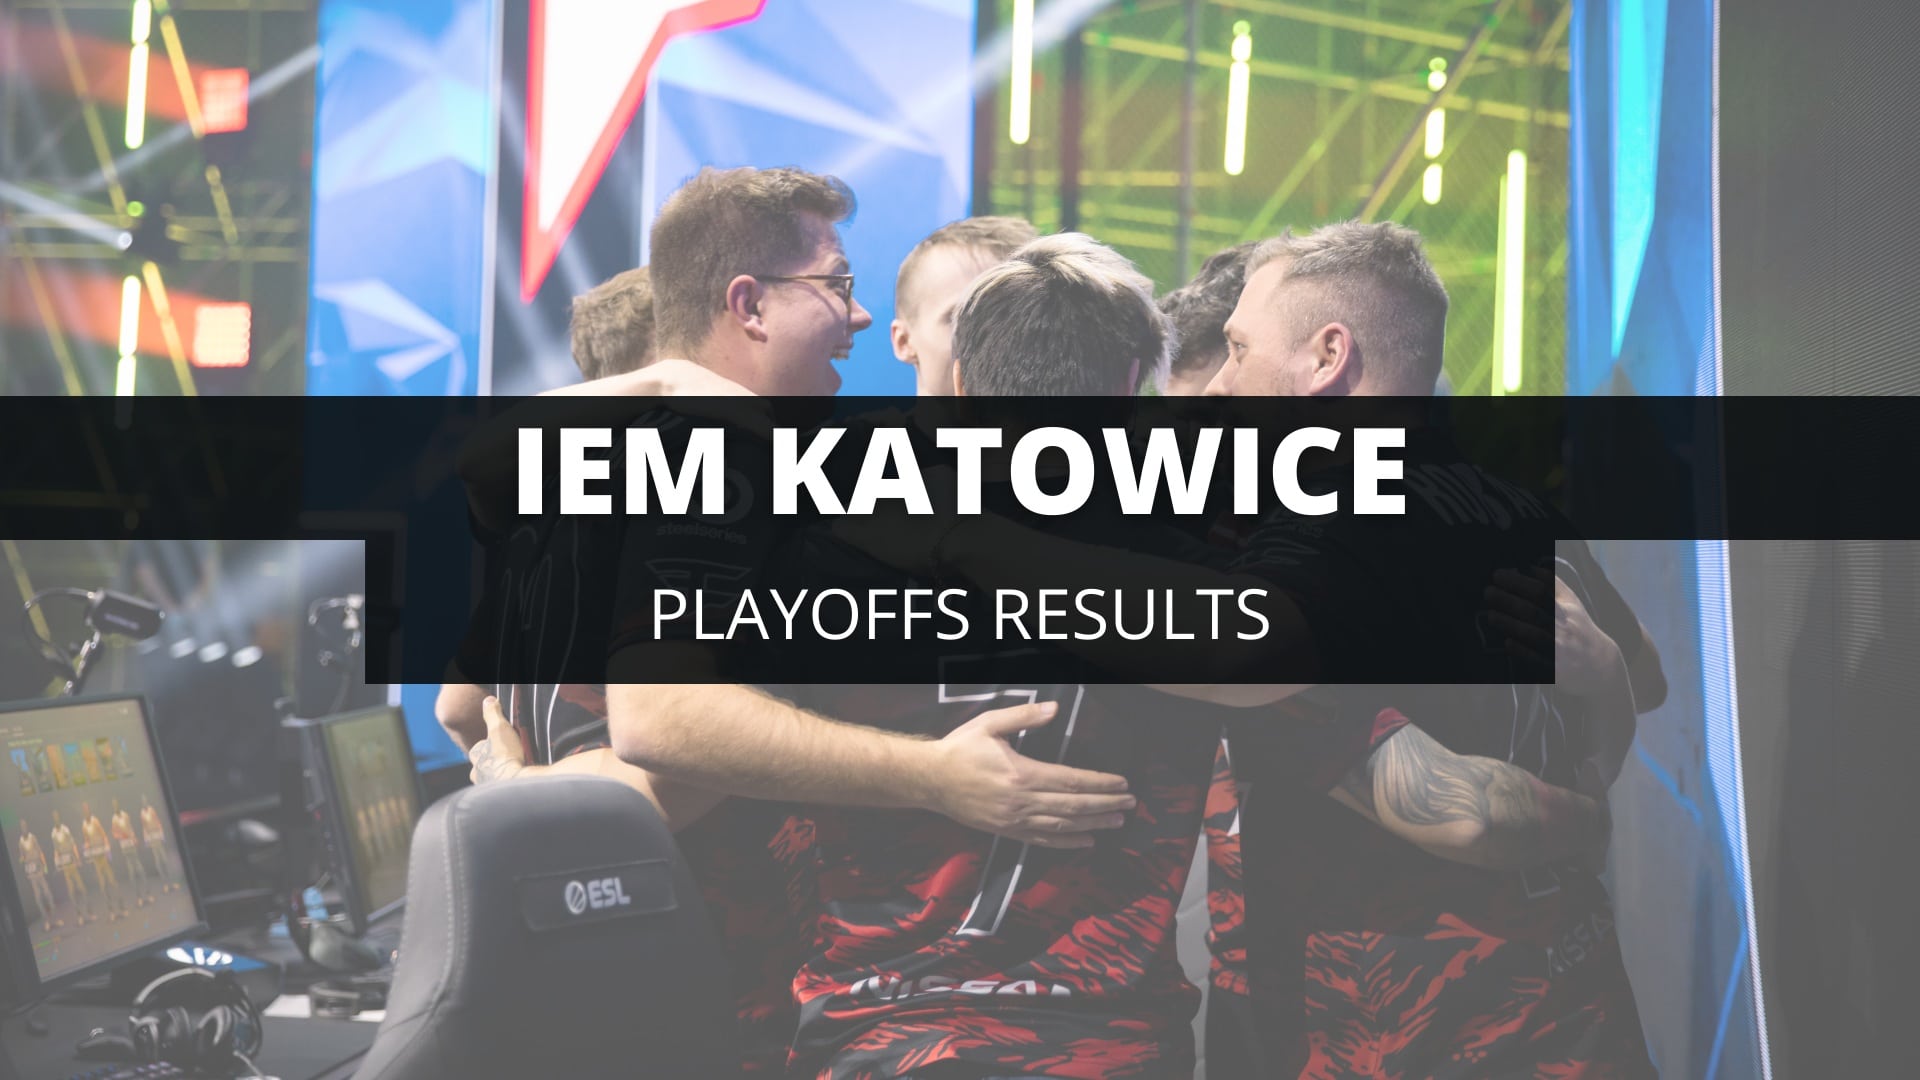 Players of a team coming together in a faded picture, titled IEM Katowice, Playoffs Results.